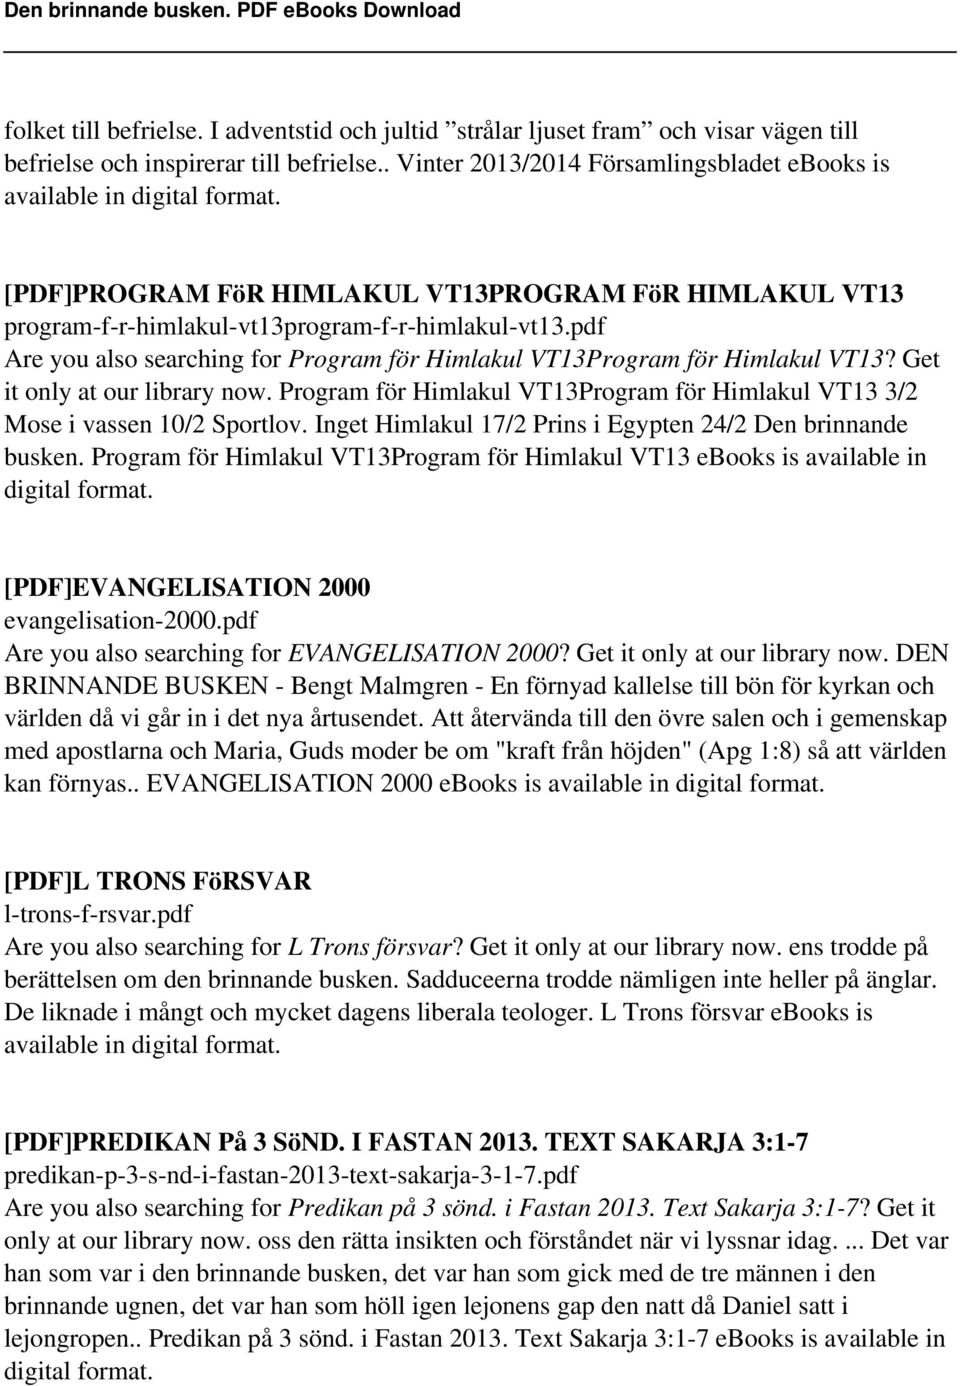 pdf Are you also searching for Program för Himlakul VT13Program för Himlakul VT13? Get it only at our library now. Program för Himlakul VT13Program för Himlakul VT13 3/2 Mose i vassen 10/2 Sportlov.